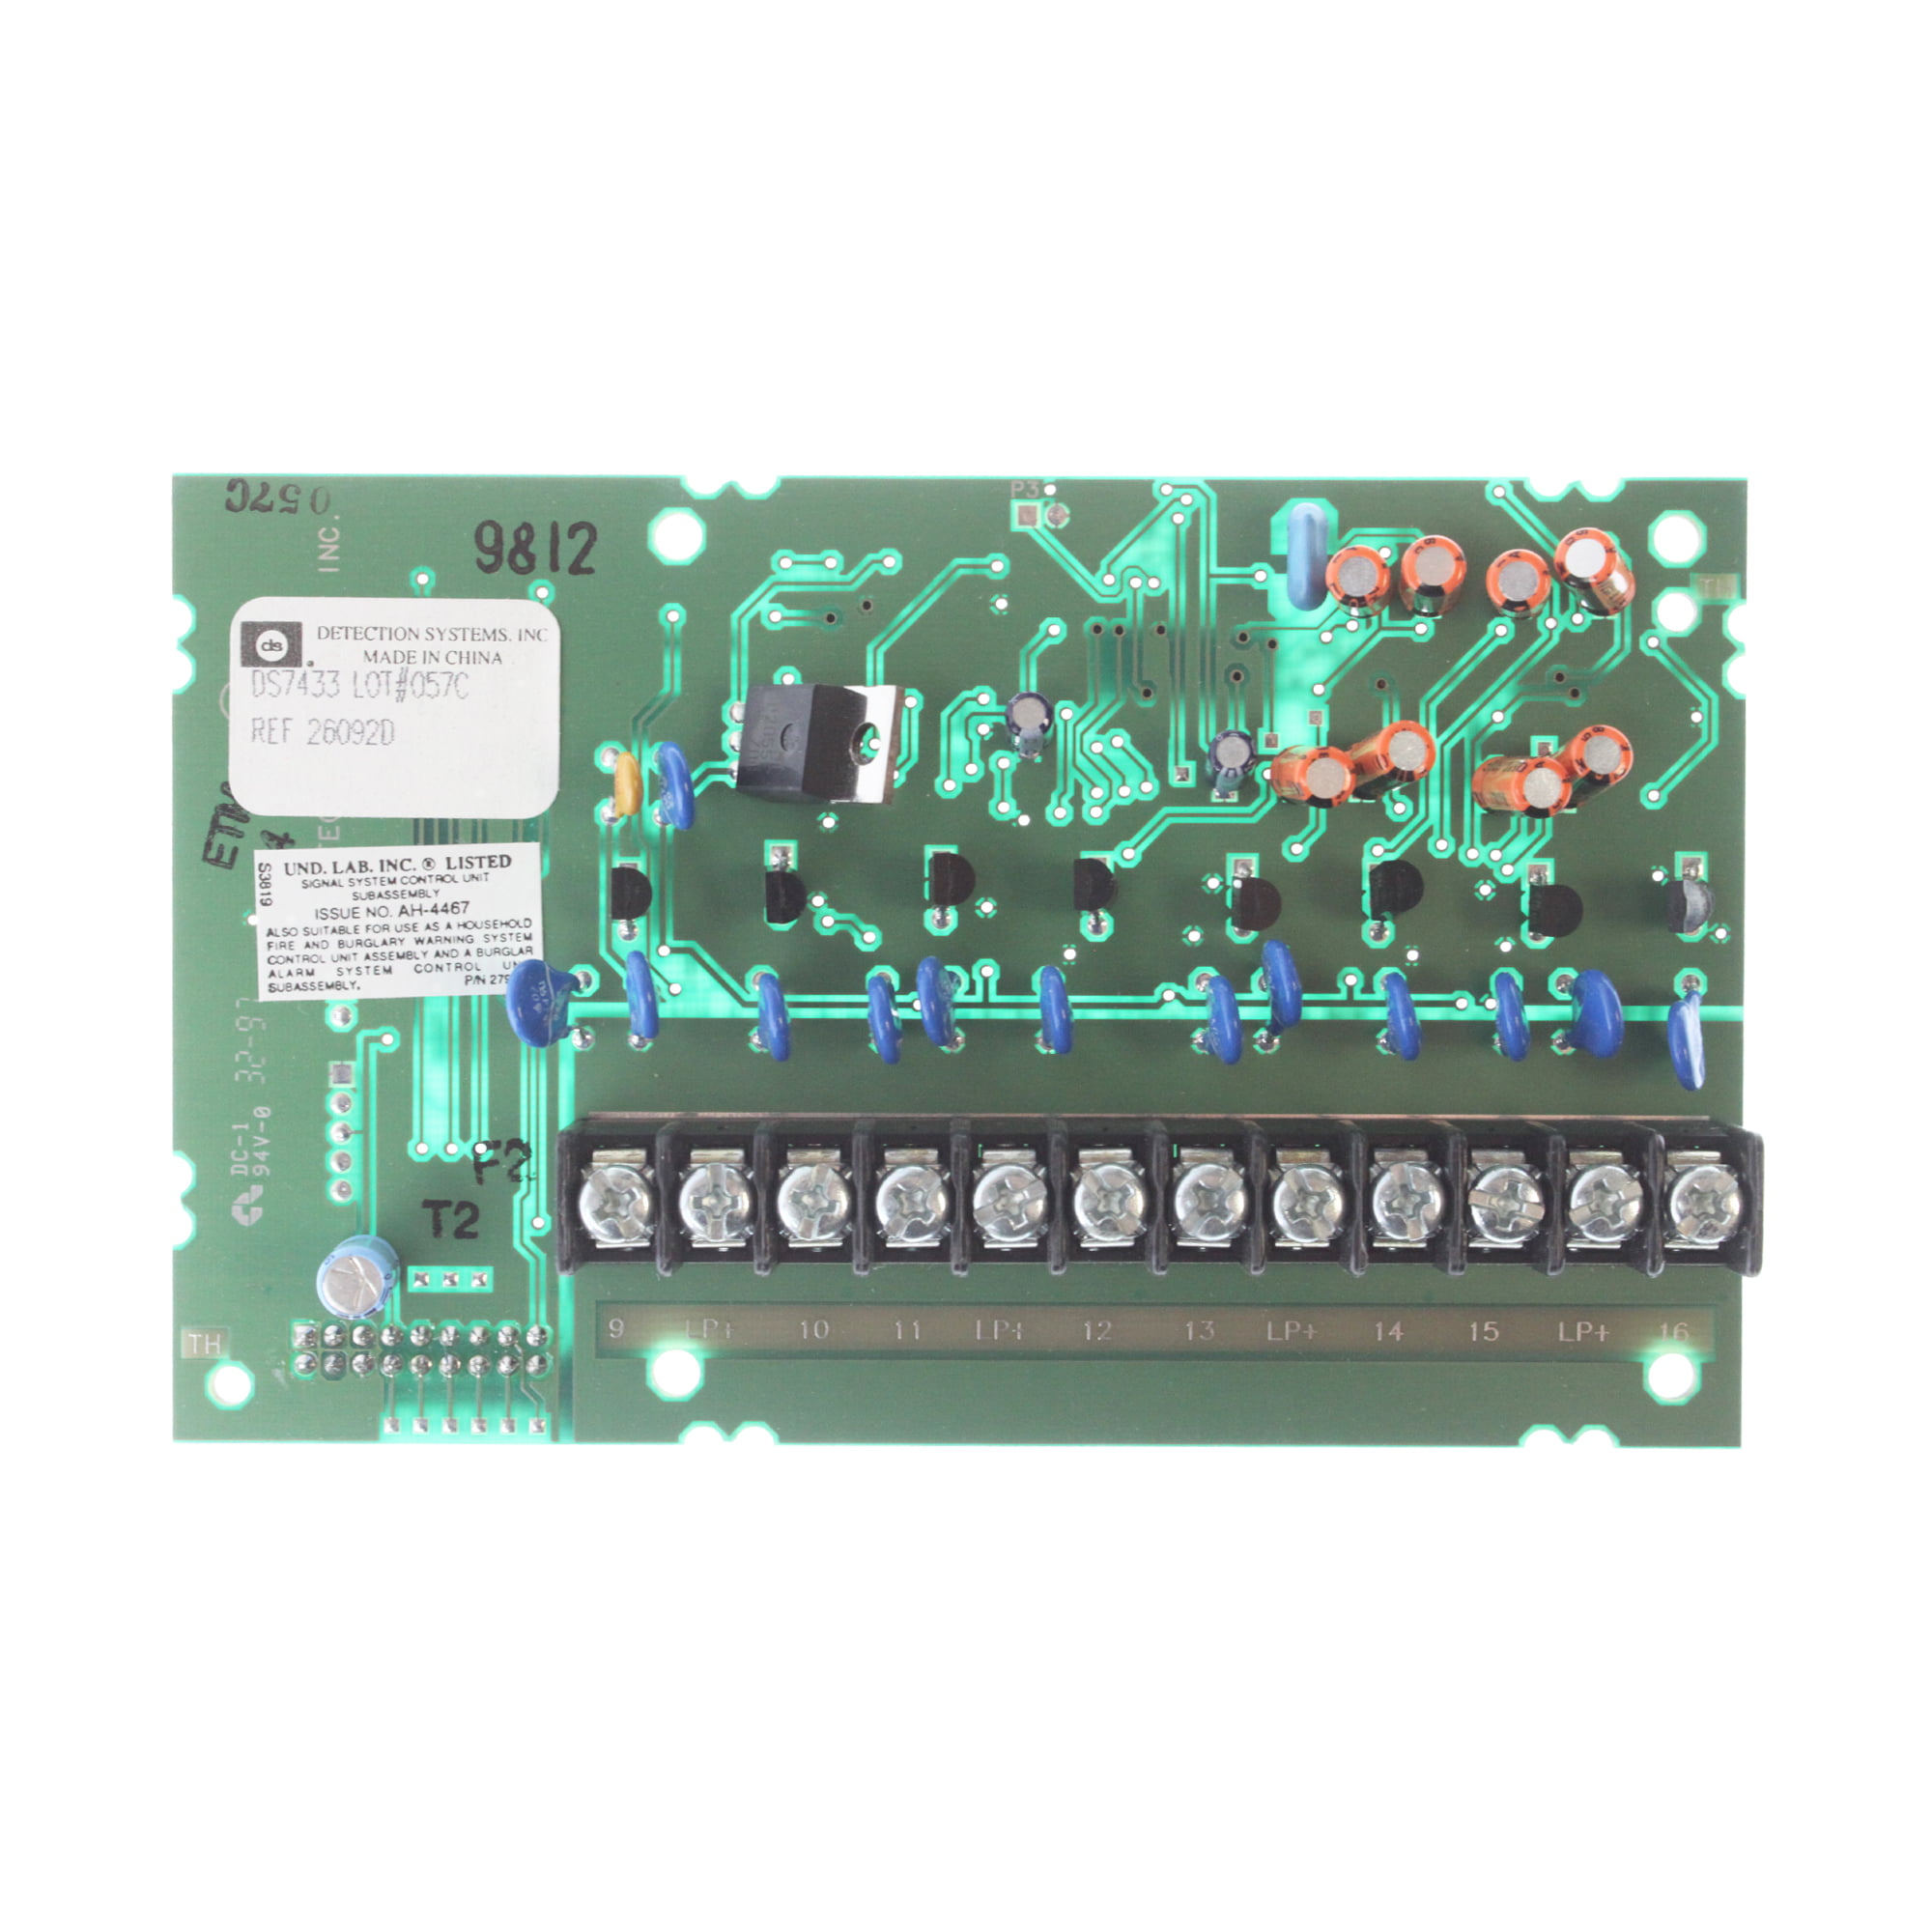 NEW DETECTION SYSTEM DS7433 INPUT REMOTE MODULE 